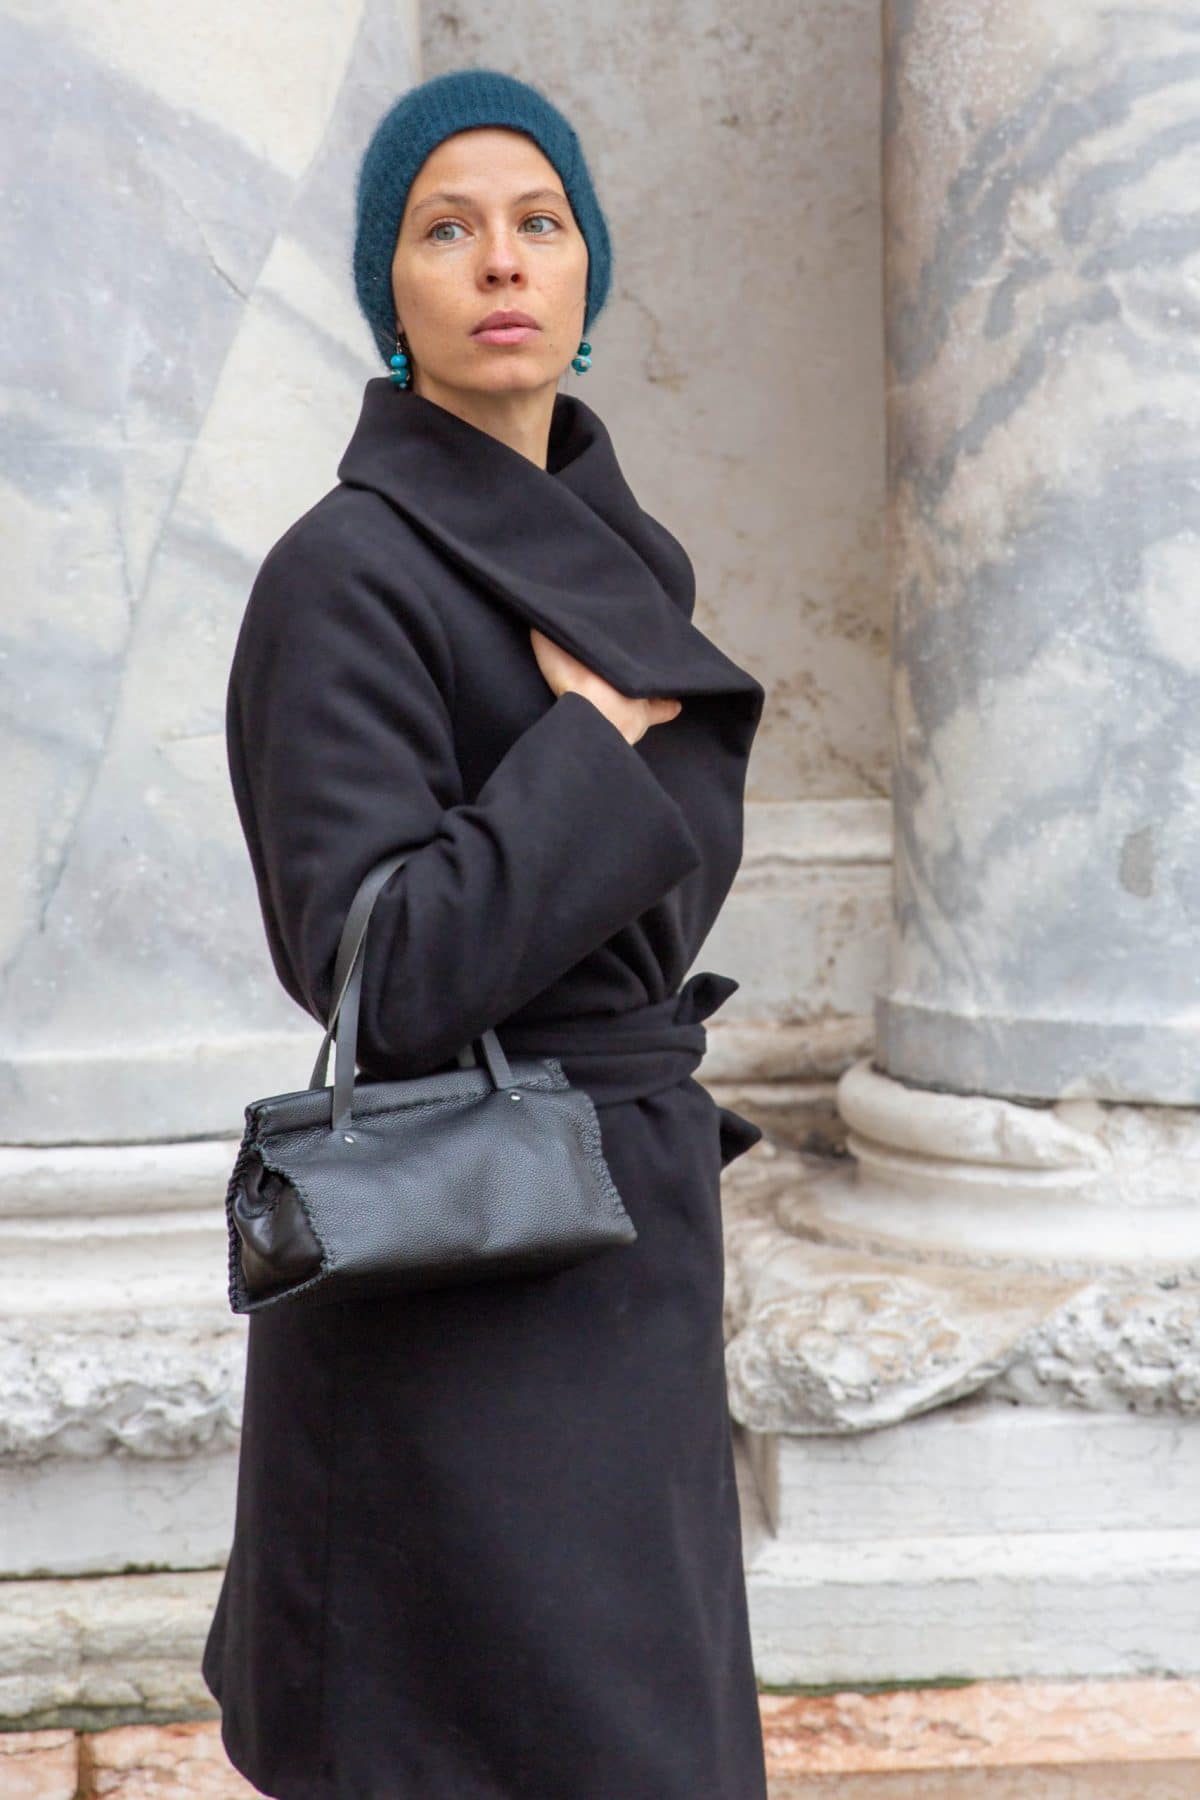 Elegant black triangle purse Shop by Venezia Autentica - Shop by Venezia Autentica - Elegant handmade leather purse entirely handstitched by a master artisan in Venice, Italy. Every purse is unique, high-quality, and customizable!